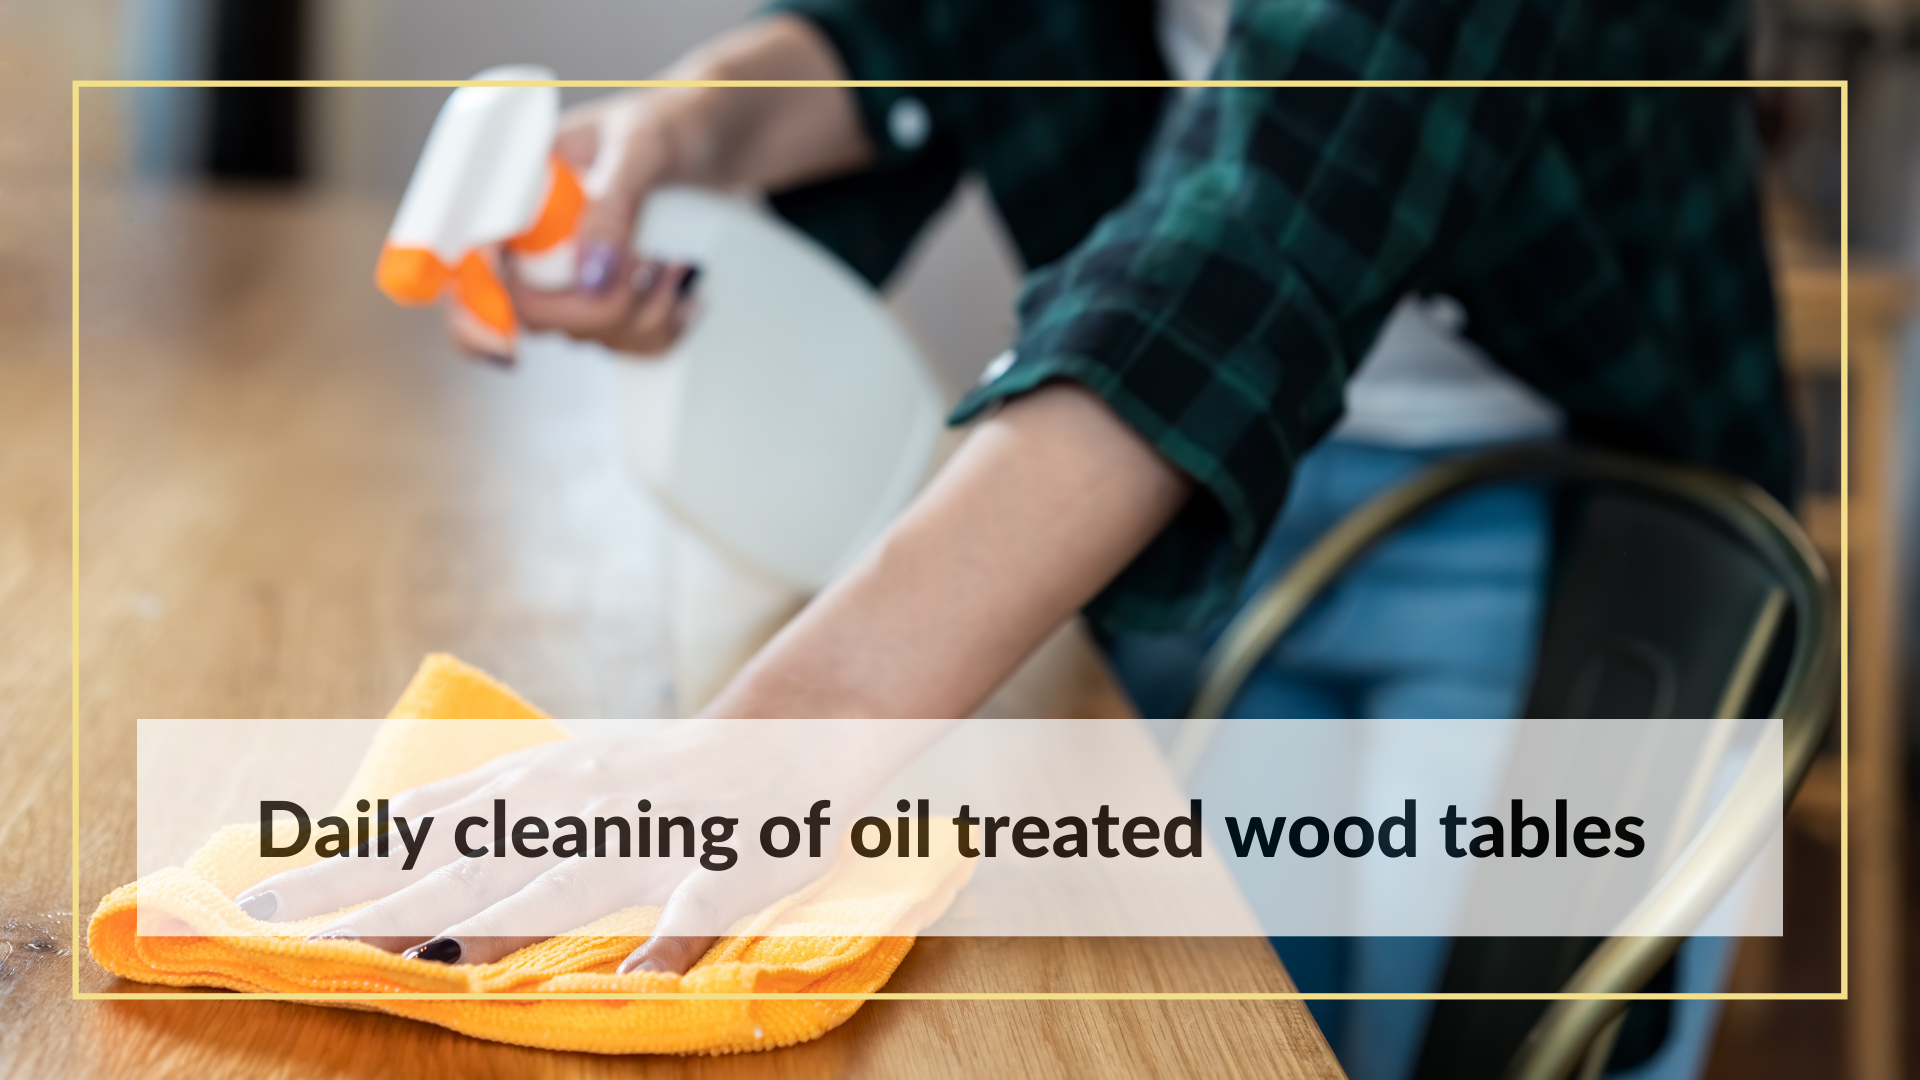 Daily cleaning of oil treated wood tables